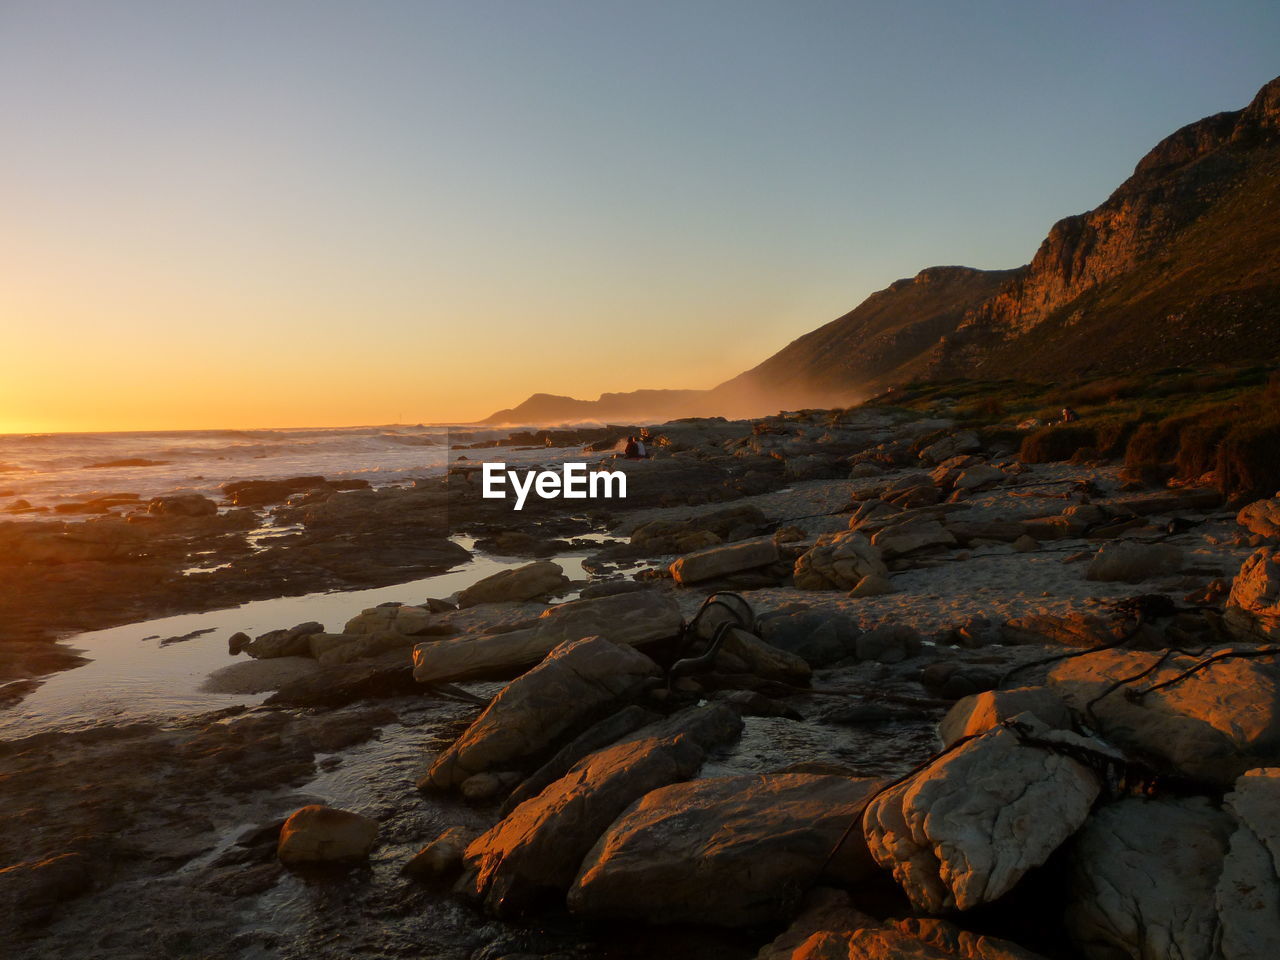 Scenic view of rocks against clear sky during sunset